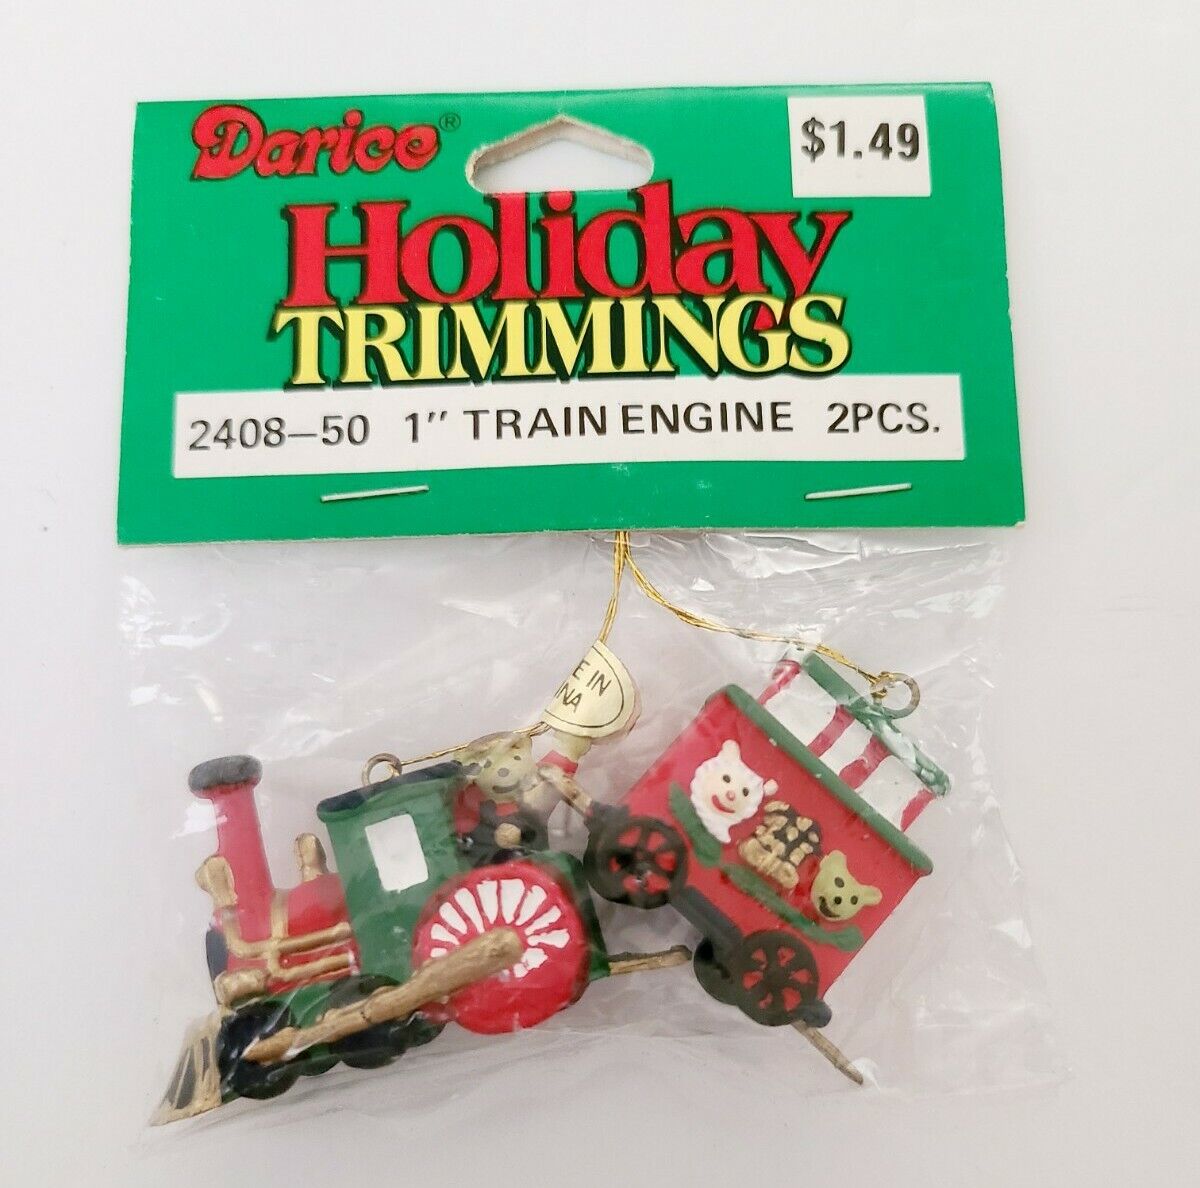 Vintage Darice Holiday Trimmings Train Engine Christmas Ornament New 2408-50